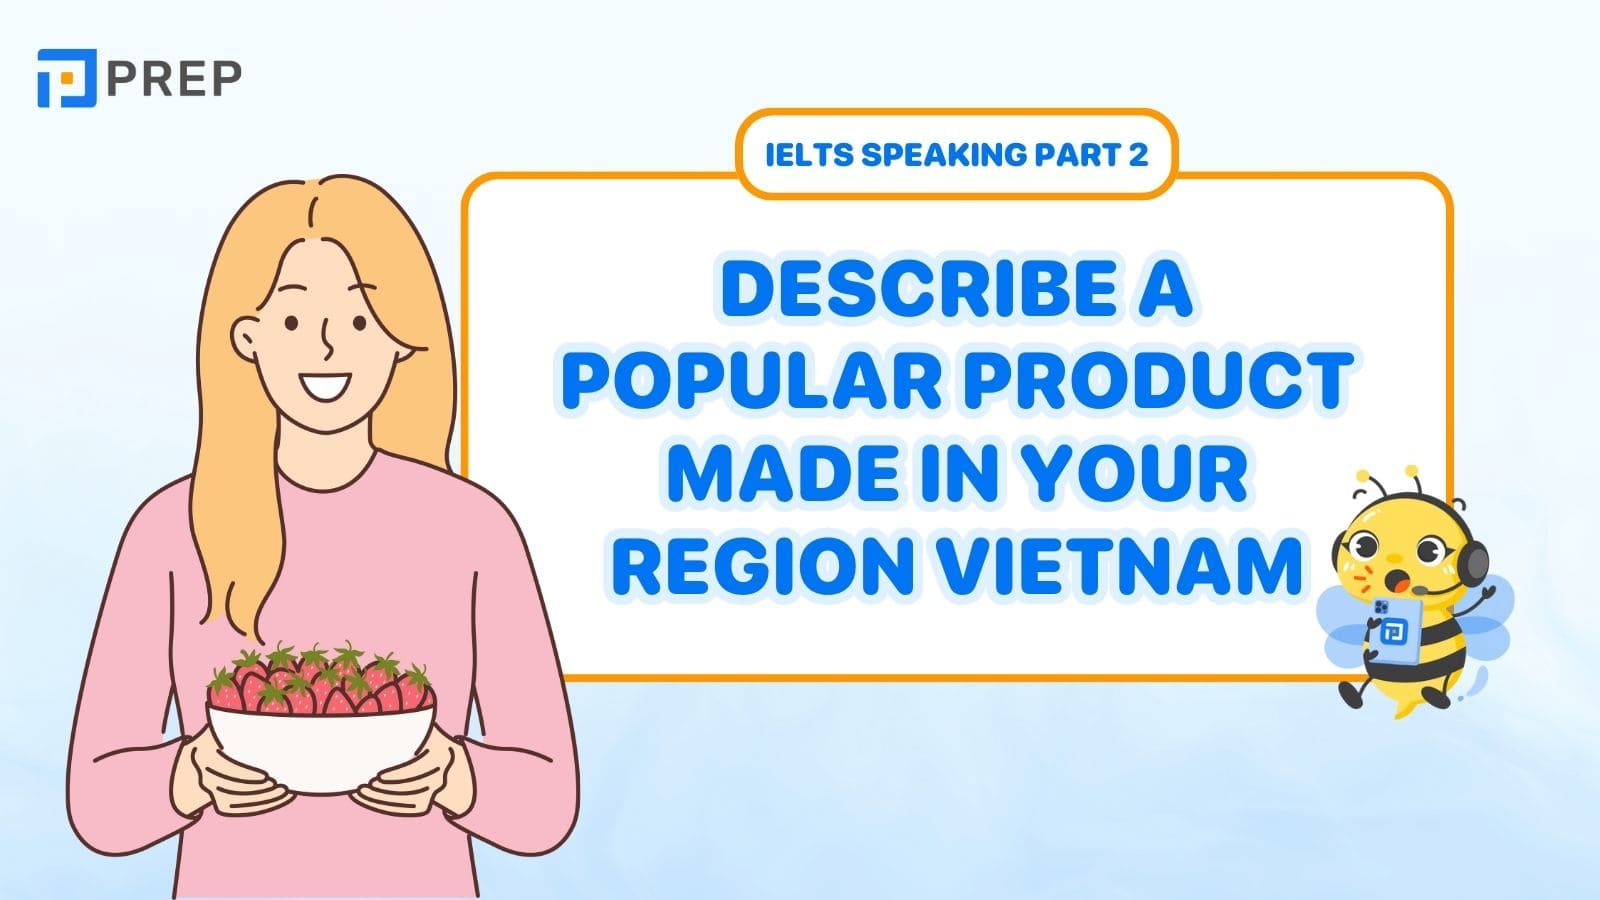 Describe a popular product made in your region vietnam